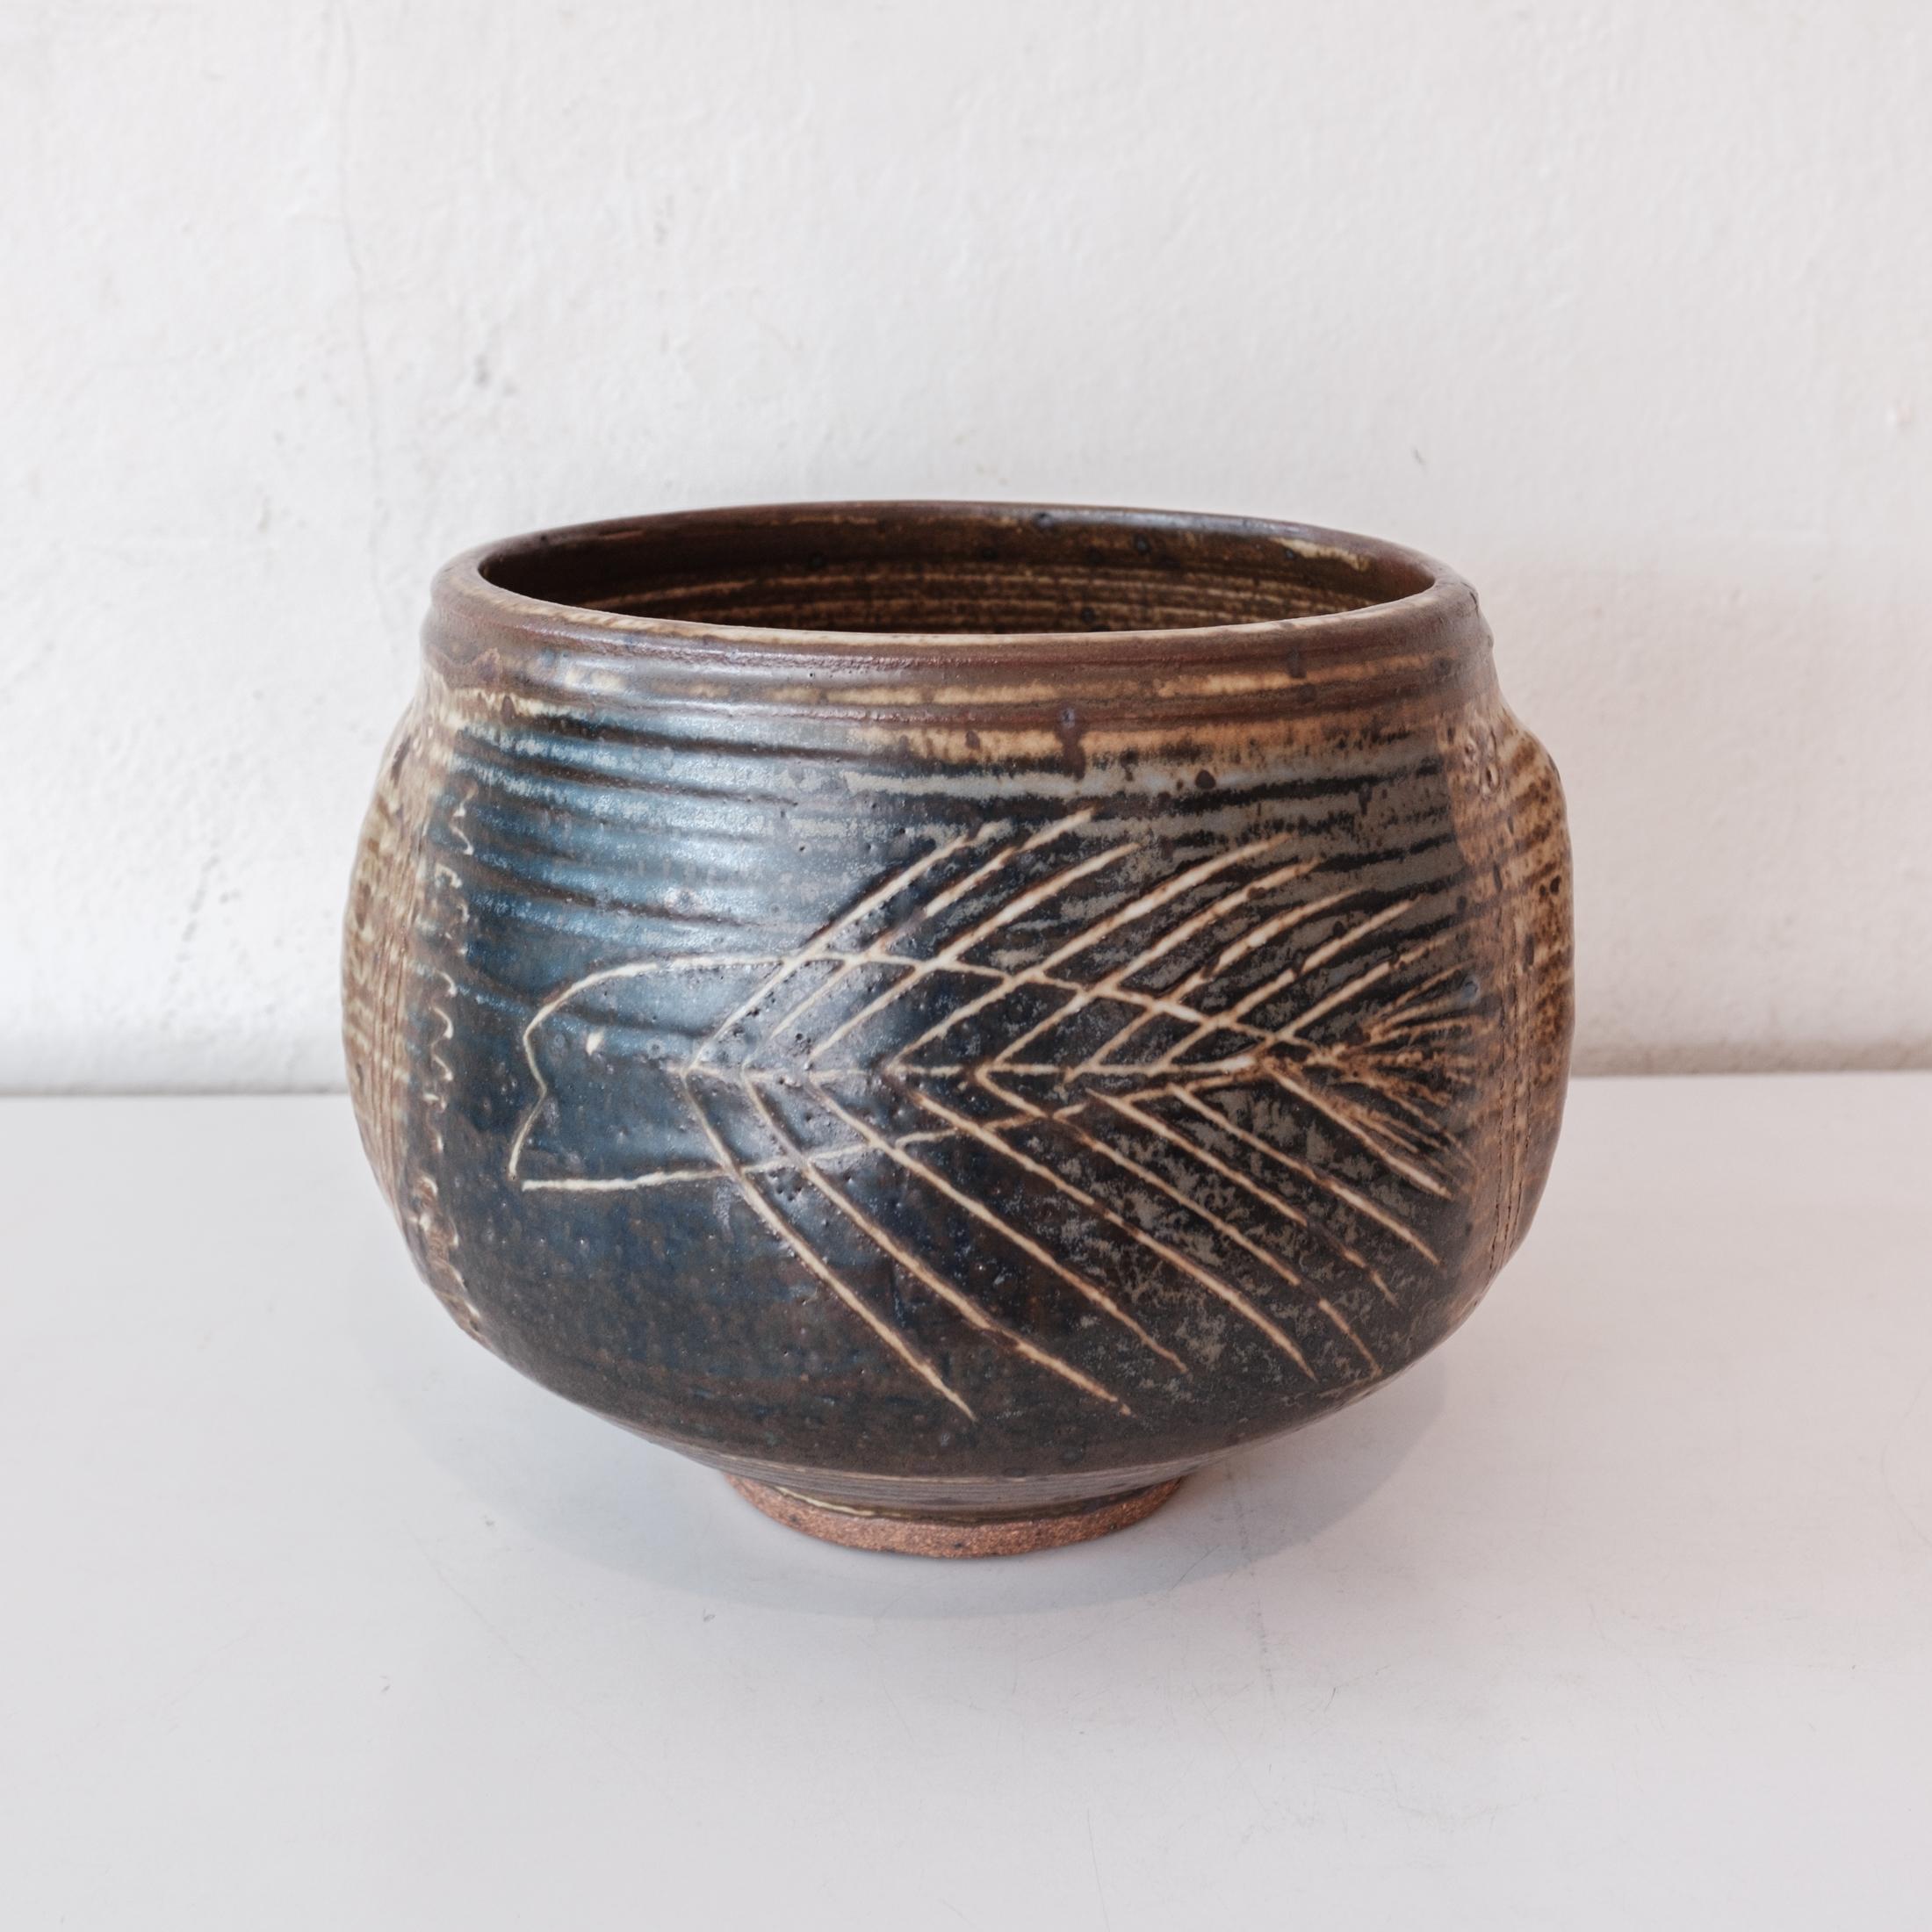 Vivika and Otto Heino stoneware bowl. Decorated with a great incised abstract fish design in cobalt and iron oxide glazes. There are also pushed out ridges on both sides, making this a really dynamic piece. It was purchased from the estate of a